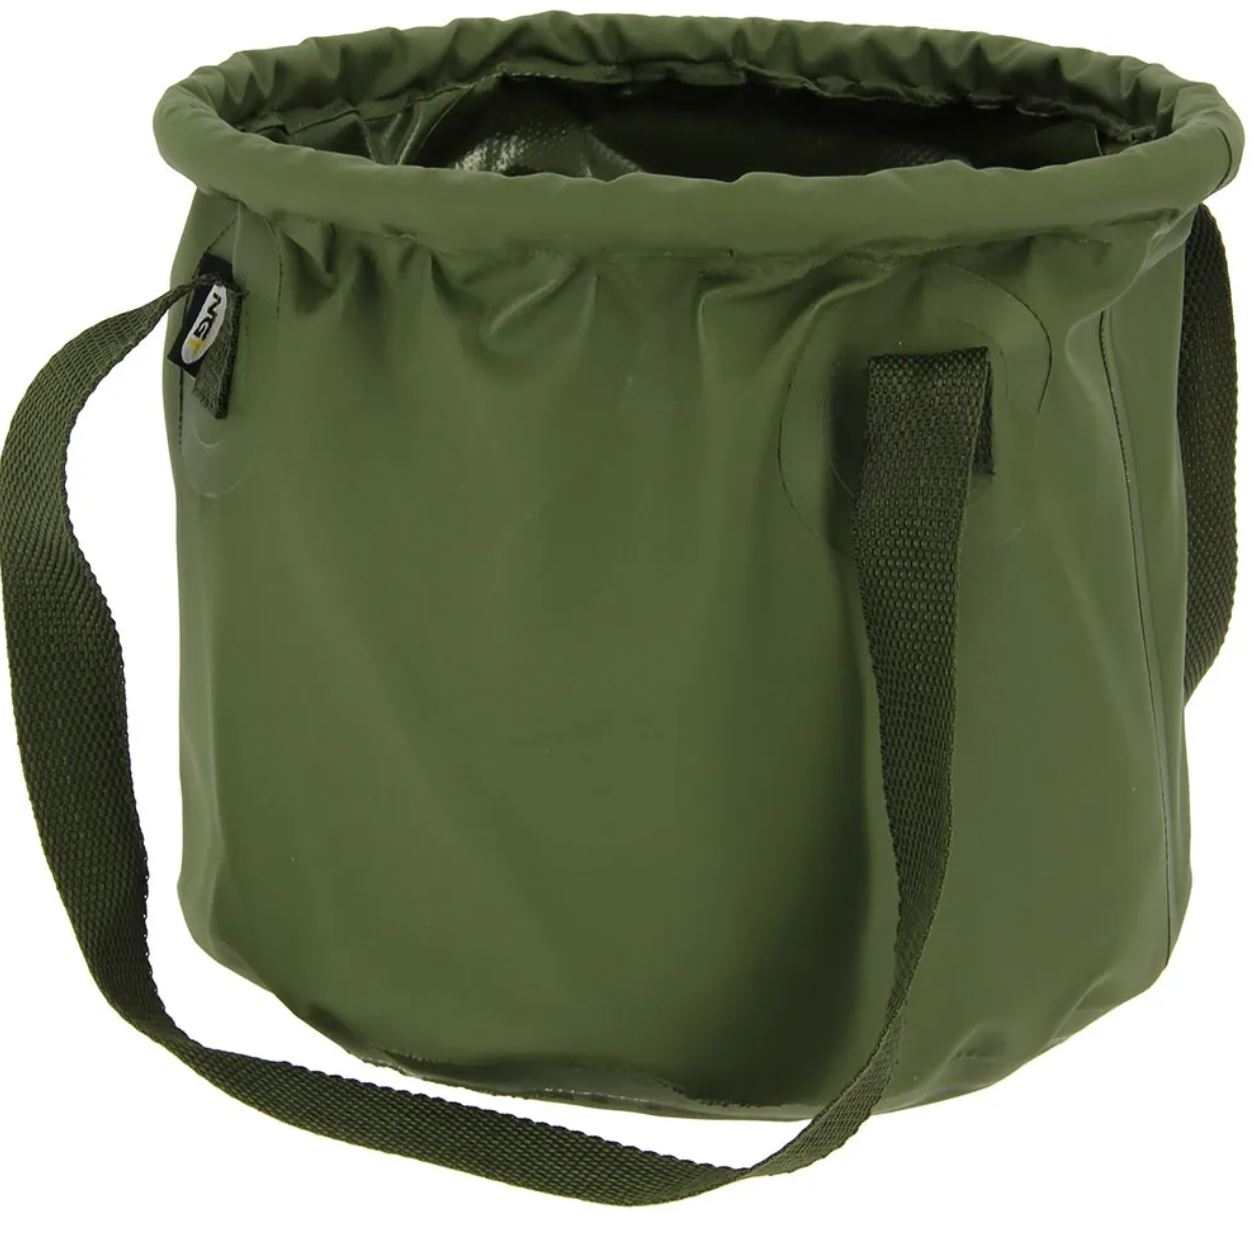 NGT PVC Water Bucket - Carp Fishing Collapsible with Handles (647)